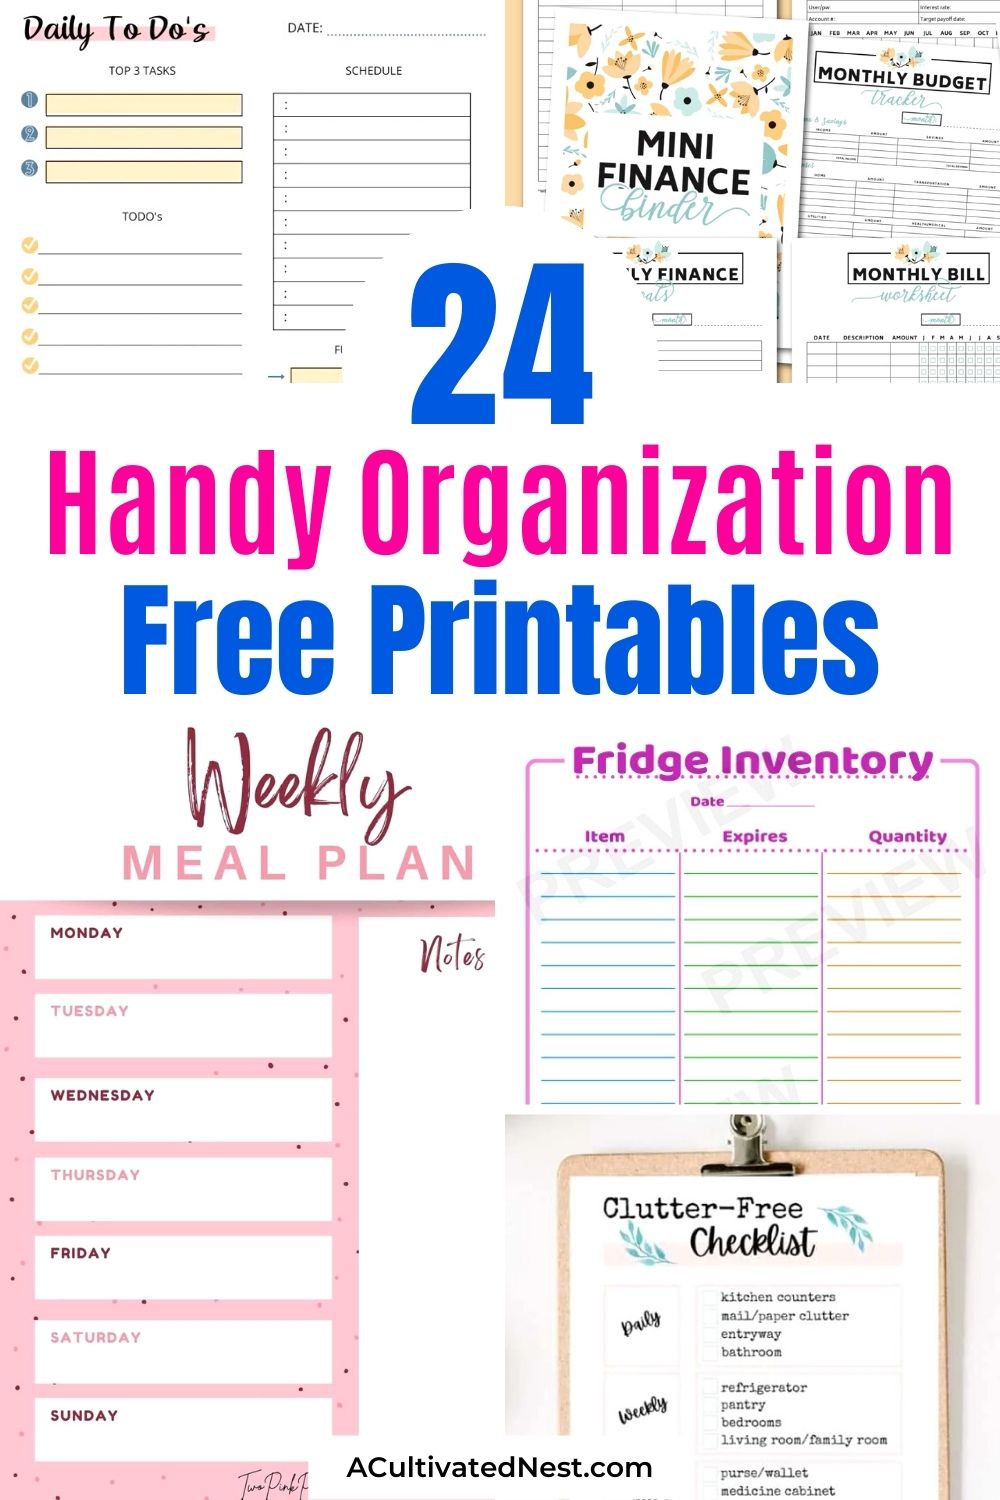 24 Handy Organization Free Printables- You can get your home and life organized easily on a budget with these handy free organization printables! These are perfect for your home binder or mom binder! | #freePrintables #printables #homeBinder #momBinder #ACultivatedNest